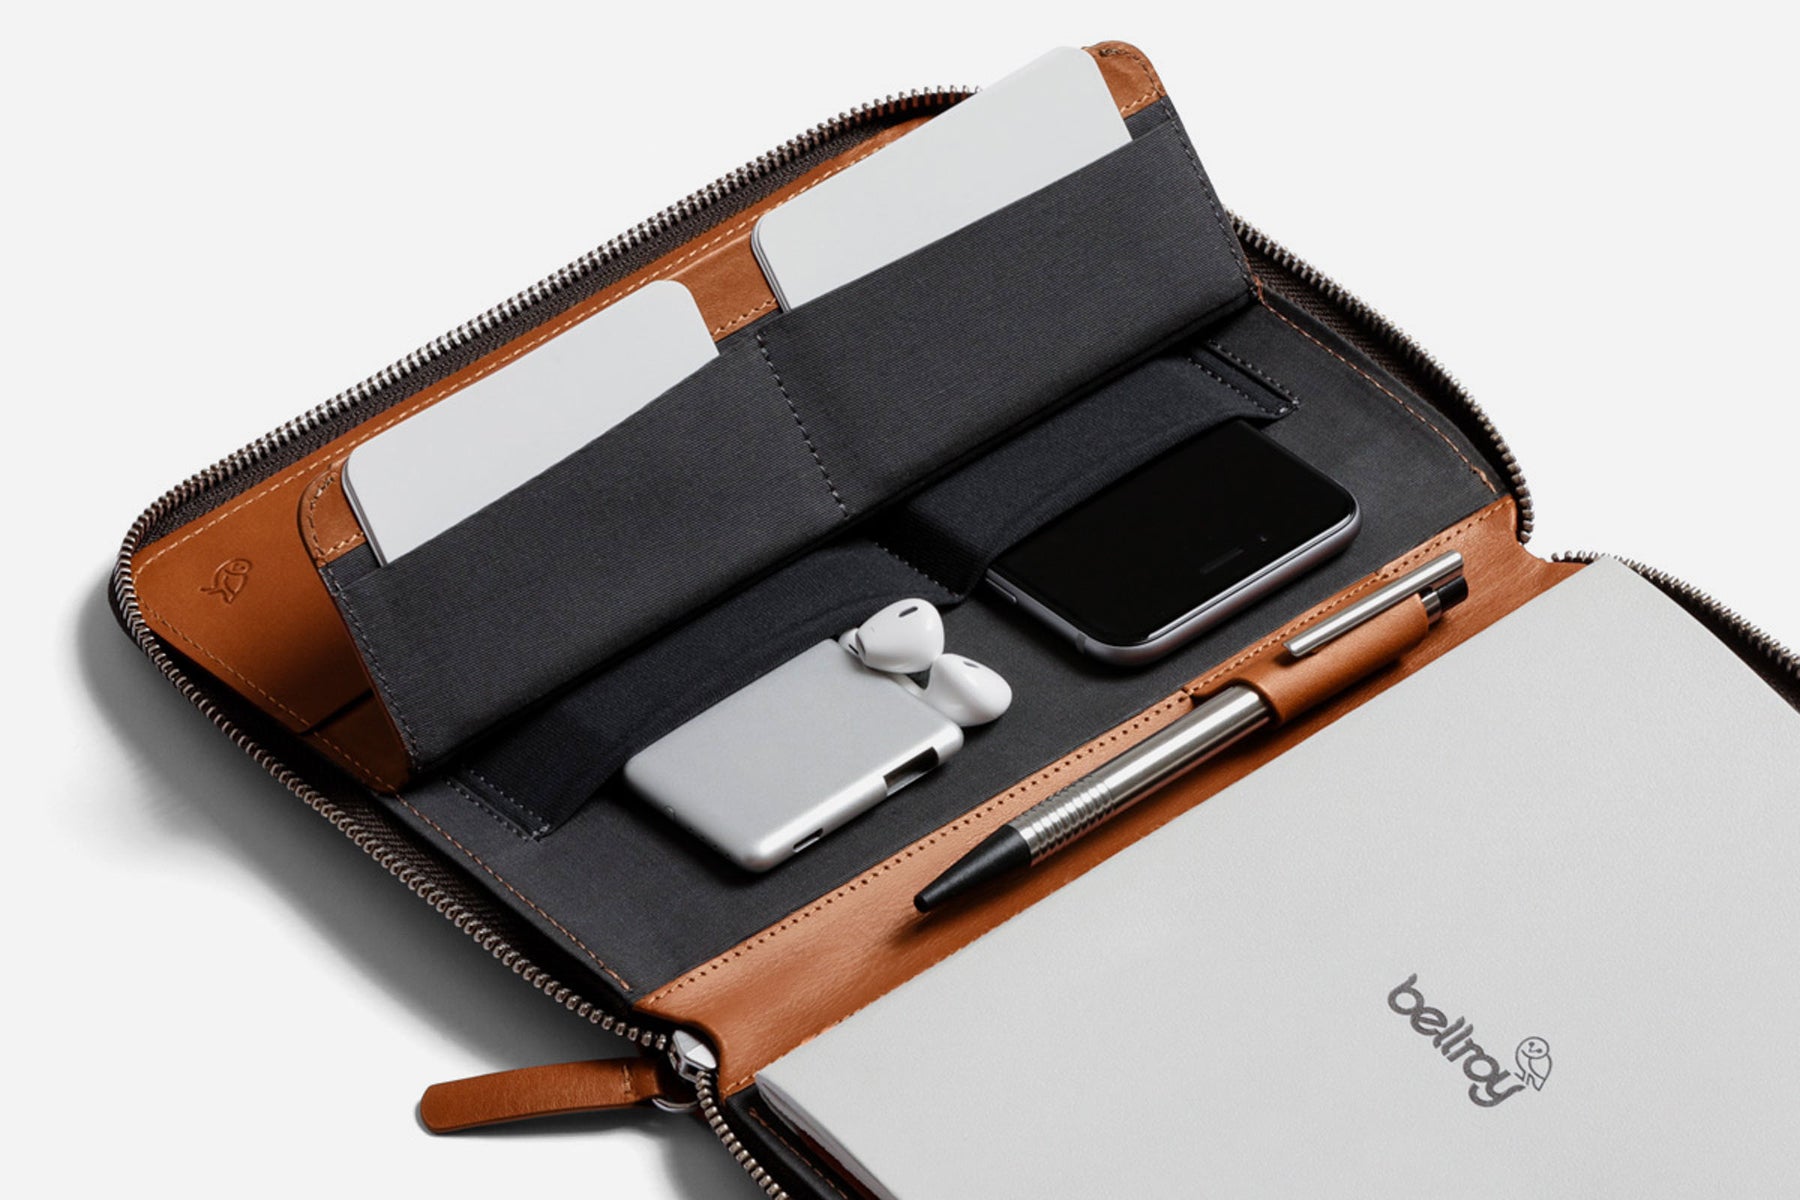 The Bellroy A5 Work Folio, A Compact Everyday Carry Companion